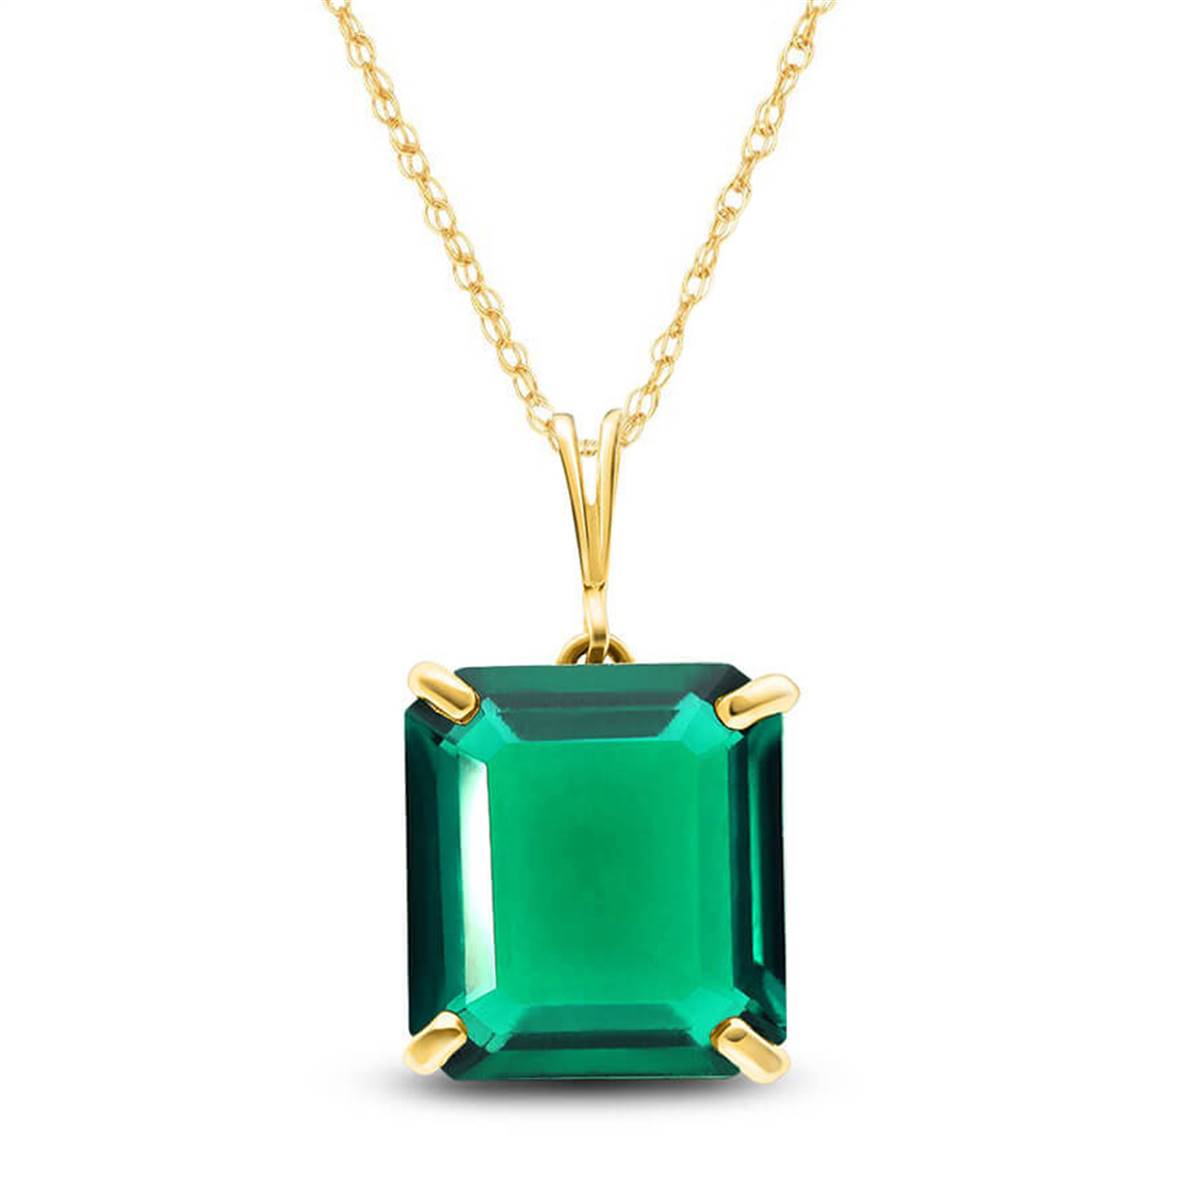 14K Solid Yellow Gold Necklace With Octagon Shape 4.5 ctw High Polished Genuine Emerald - Grade AAA